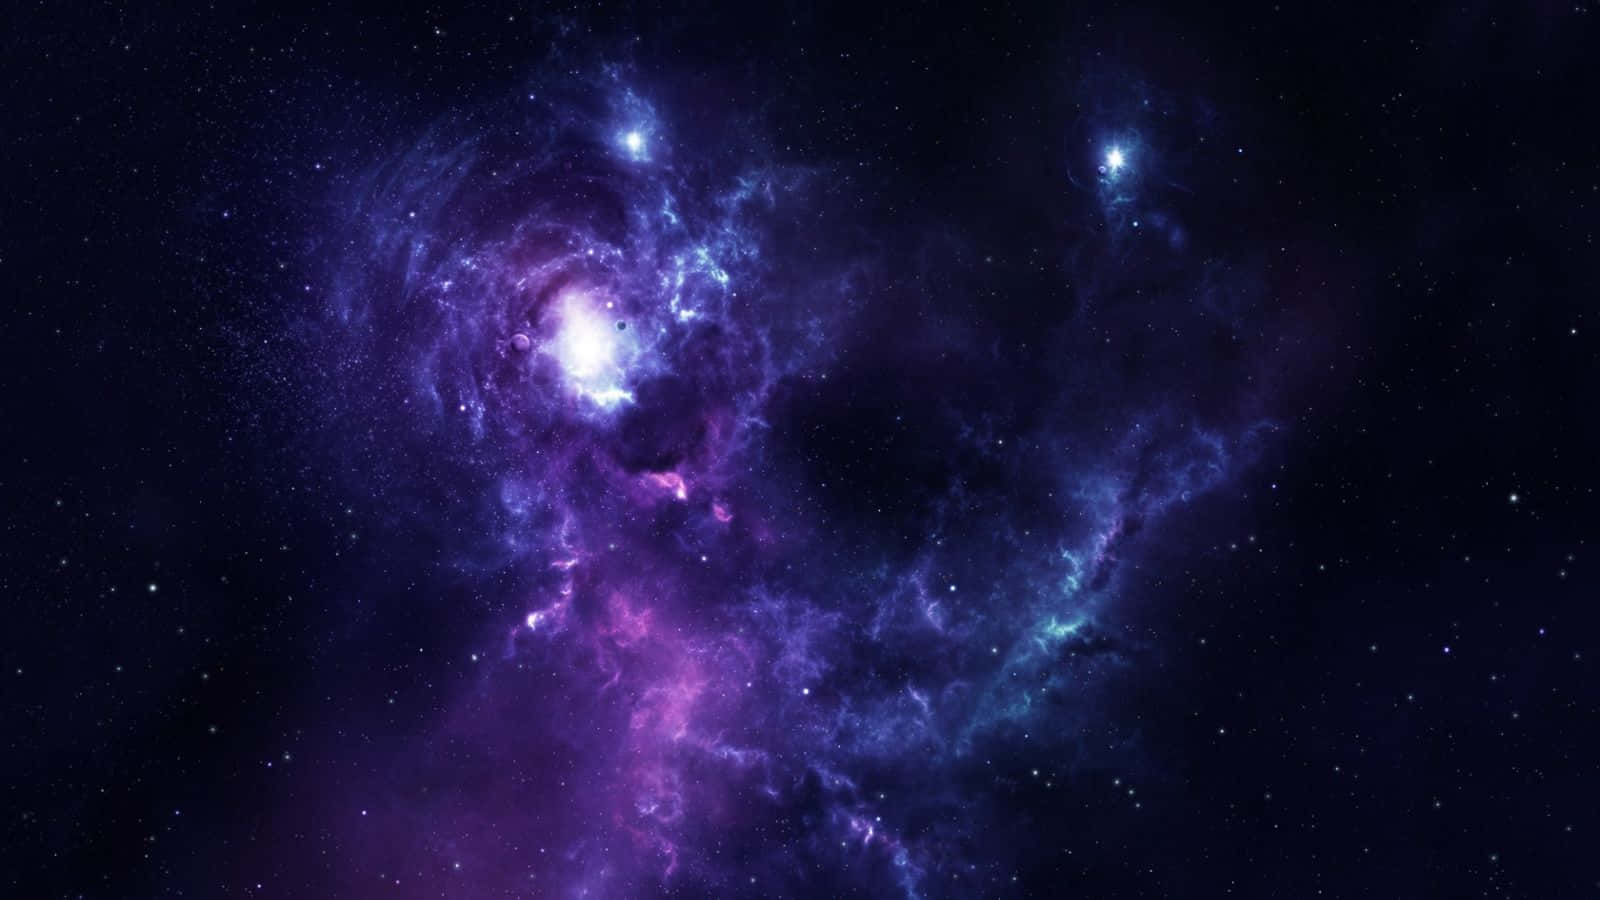 Exploring the depths of a cosmic purple space